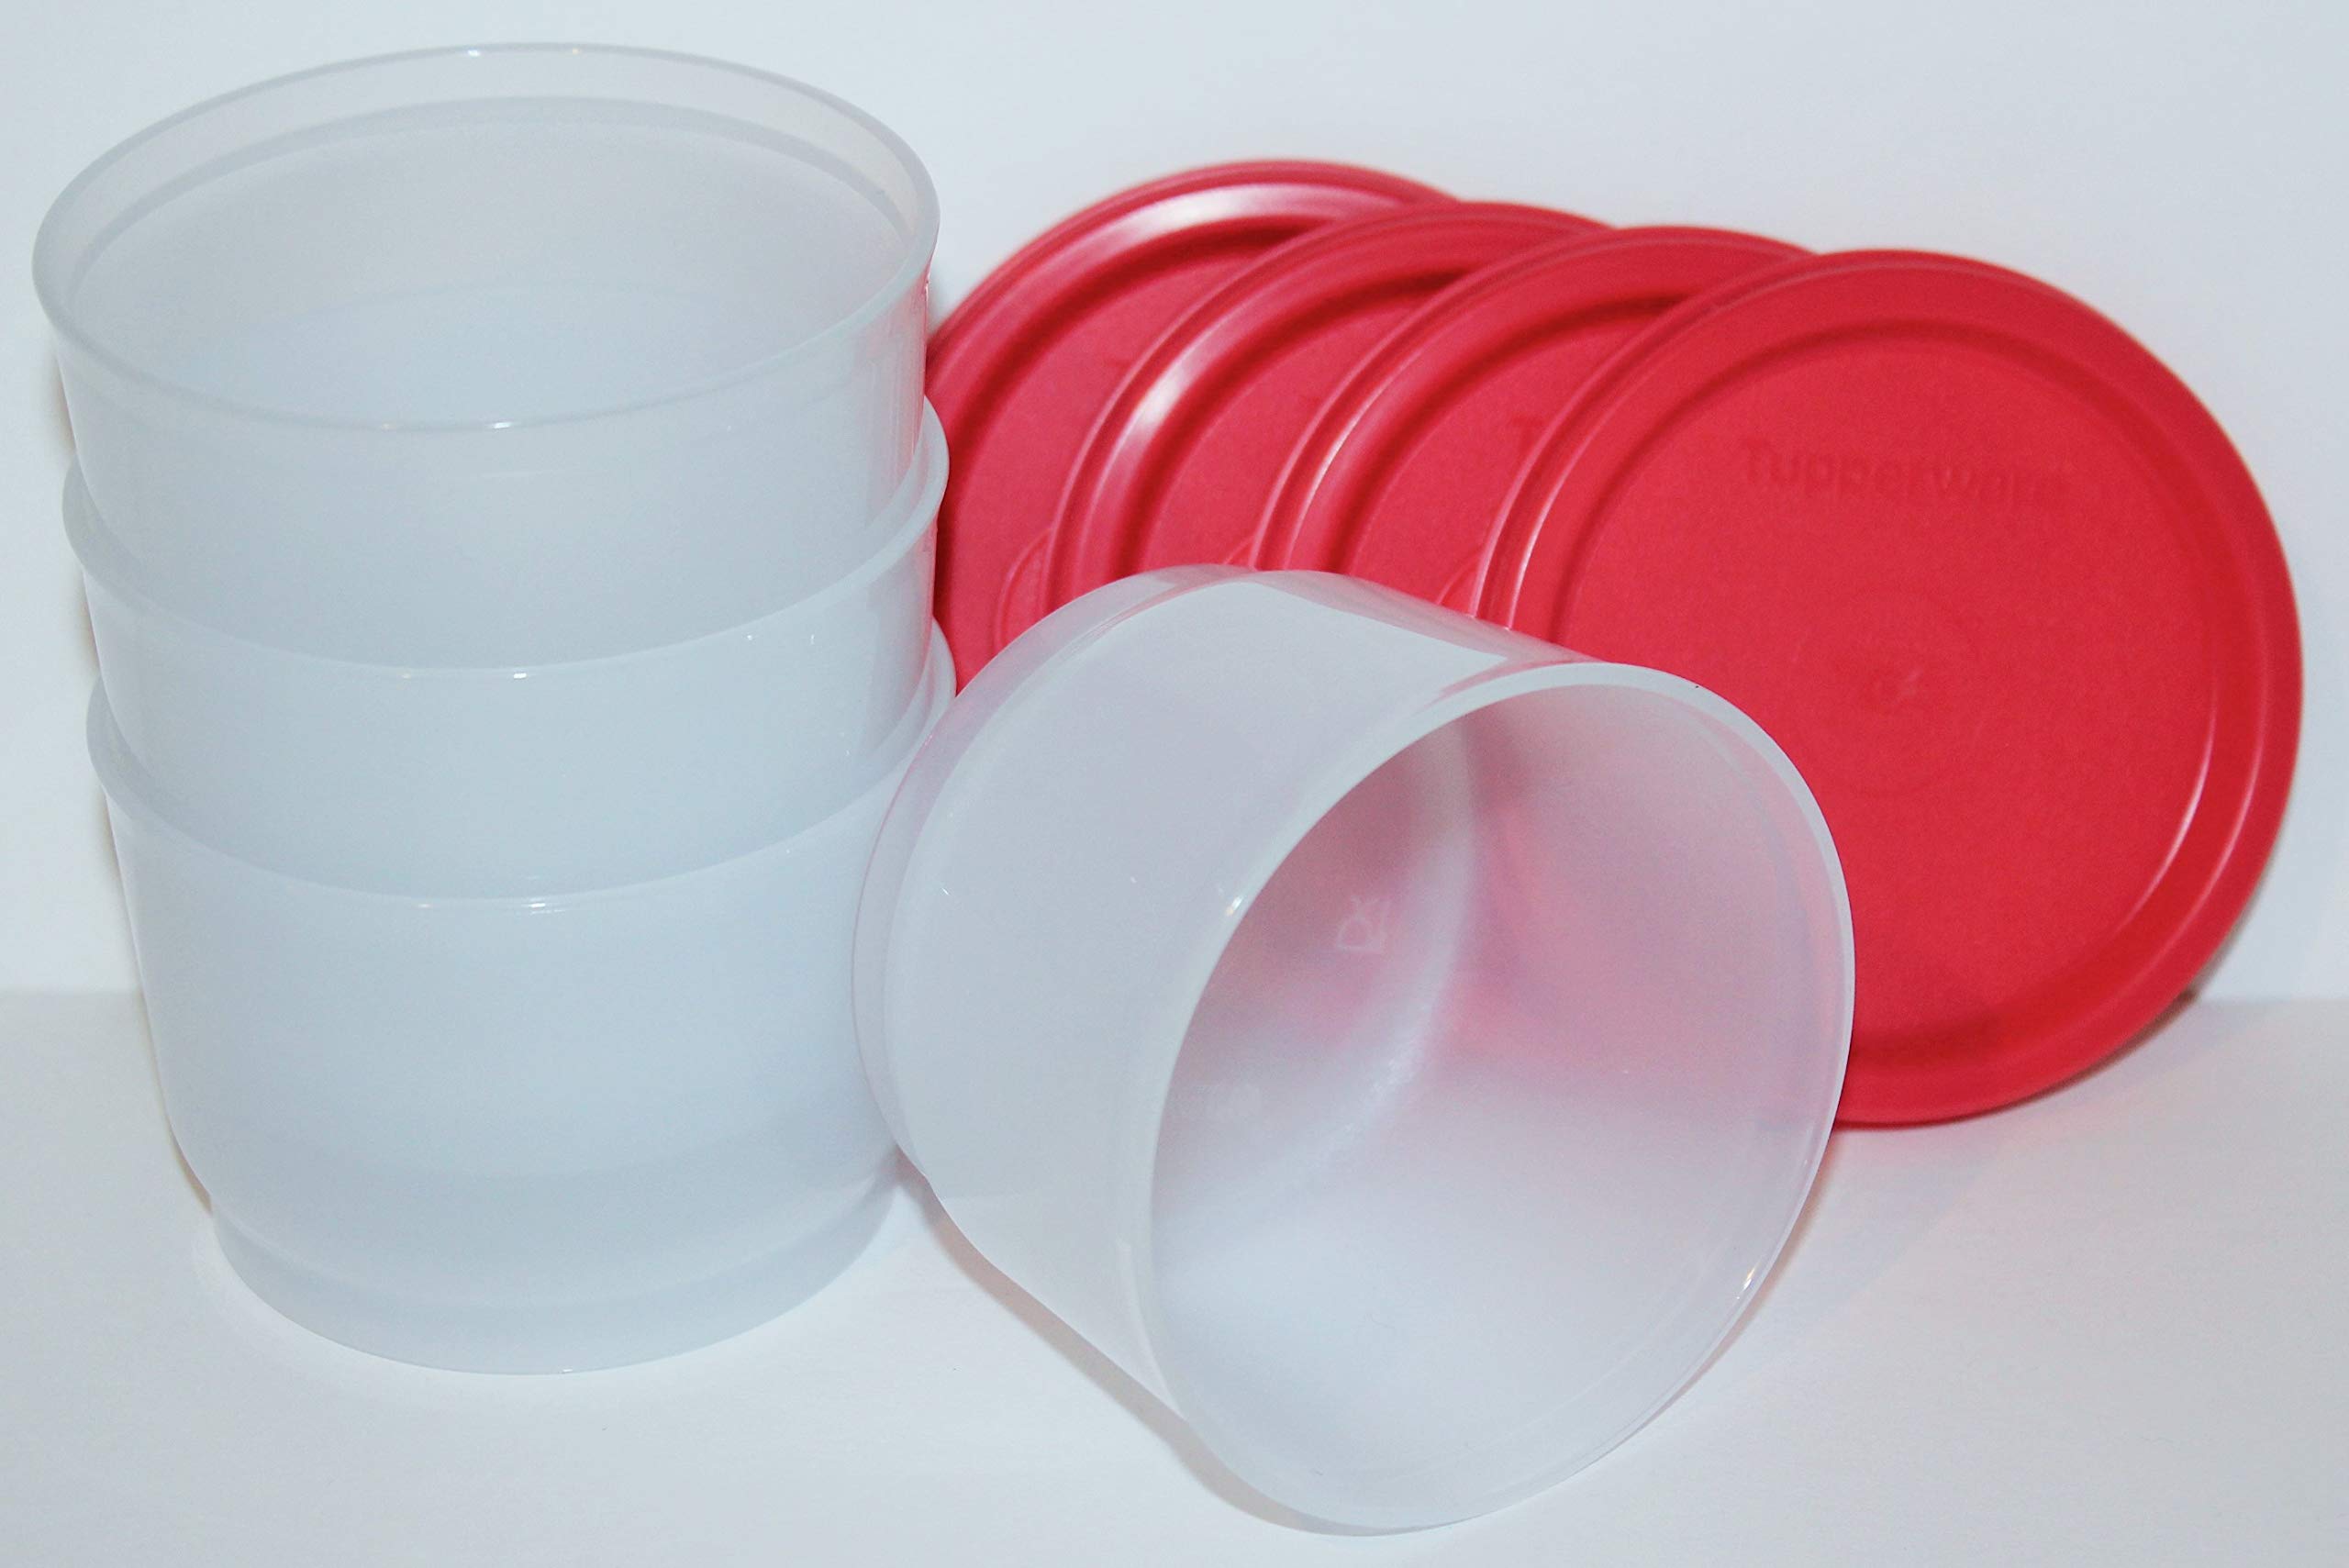 Tupperware Lunch Container Snack Cup Set of 4 Containers with Red Seals (4 ounces each)